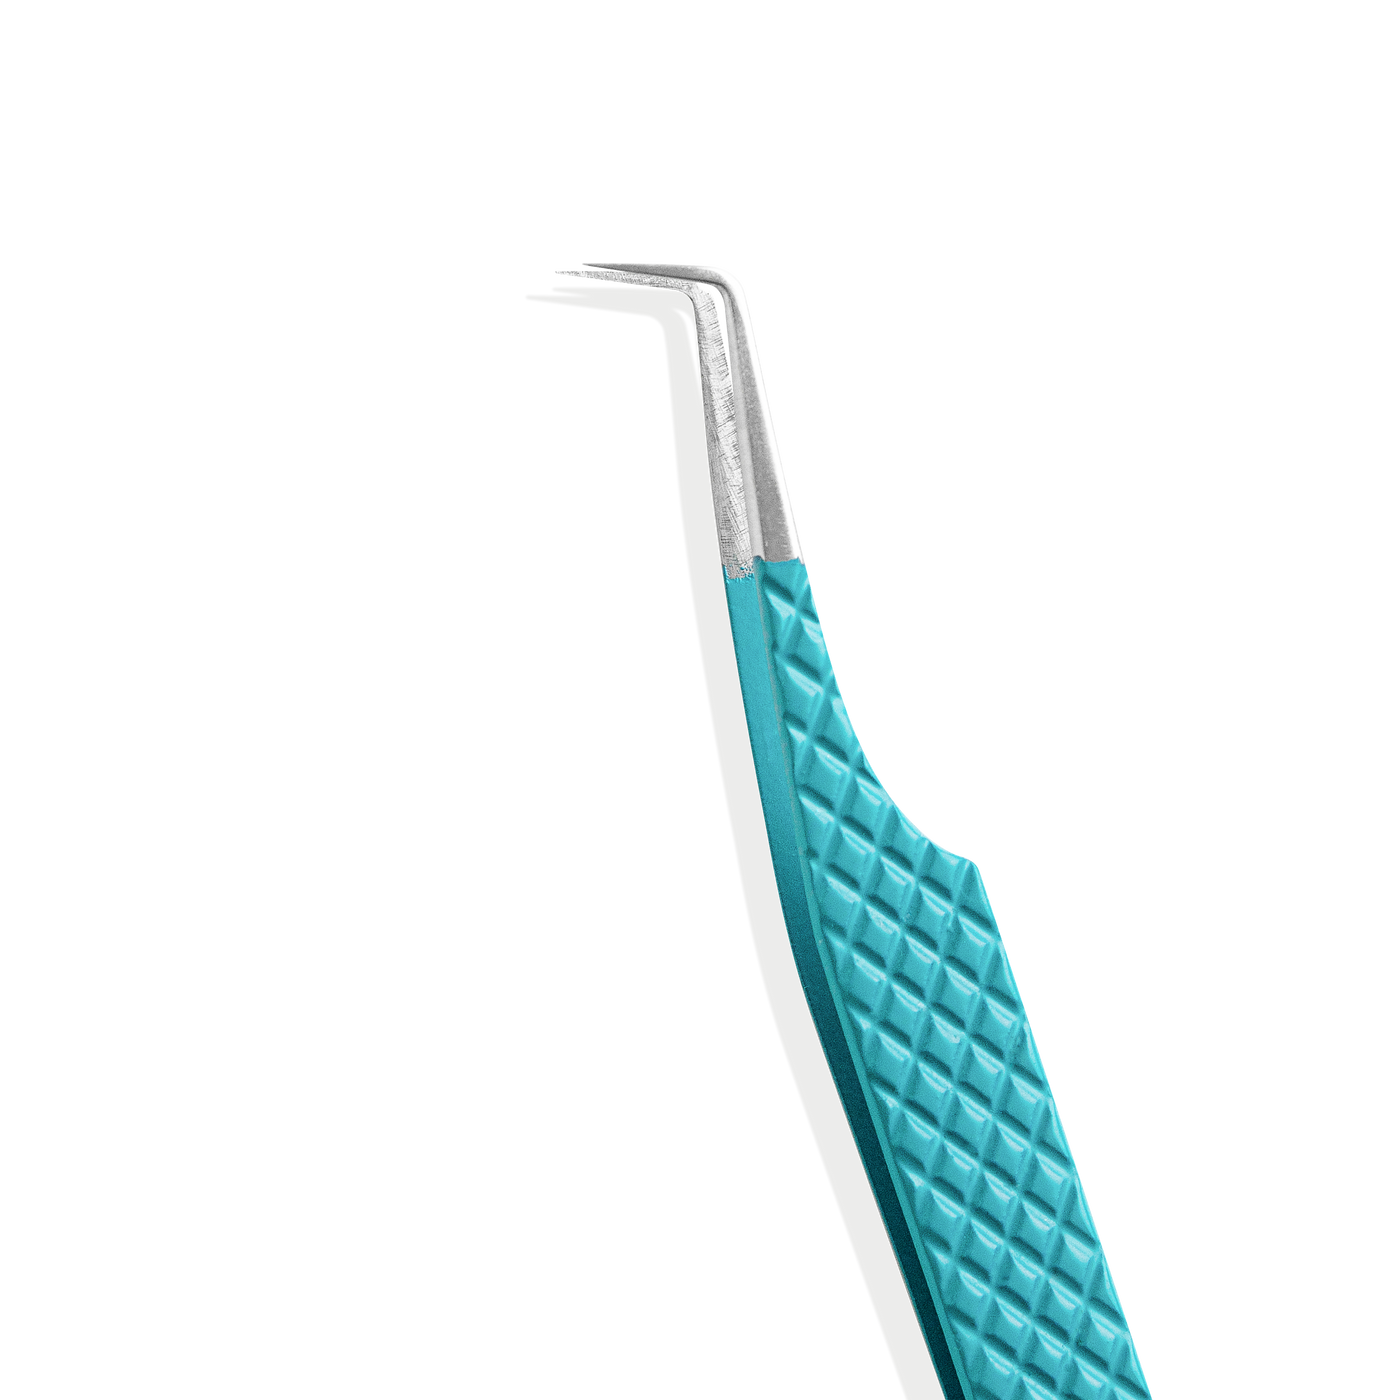  90 Degree Volume Extra Long Tweezer in teal colour from Envolash